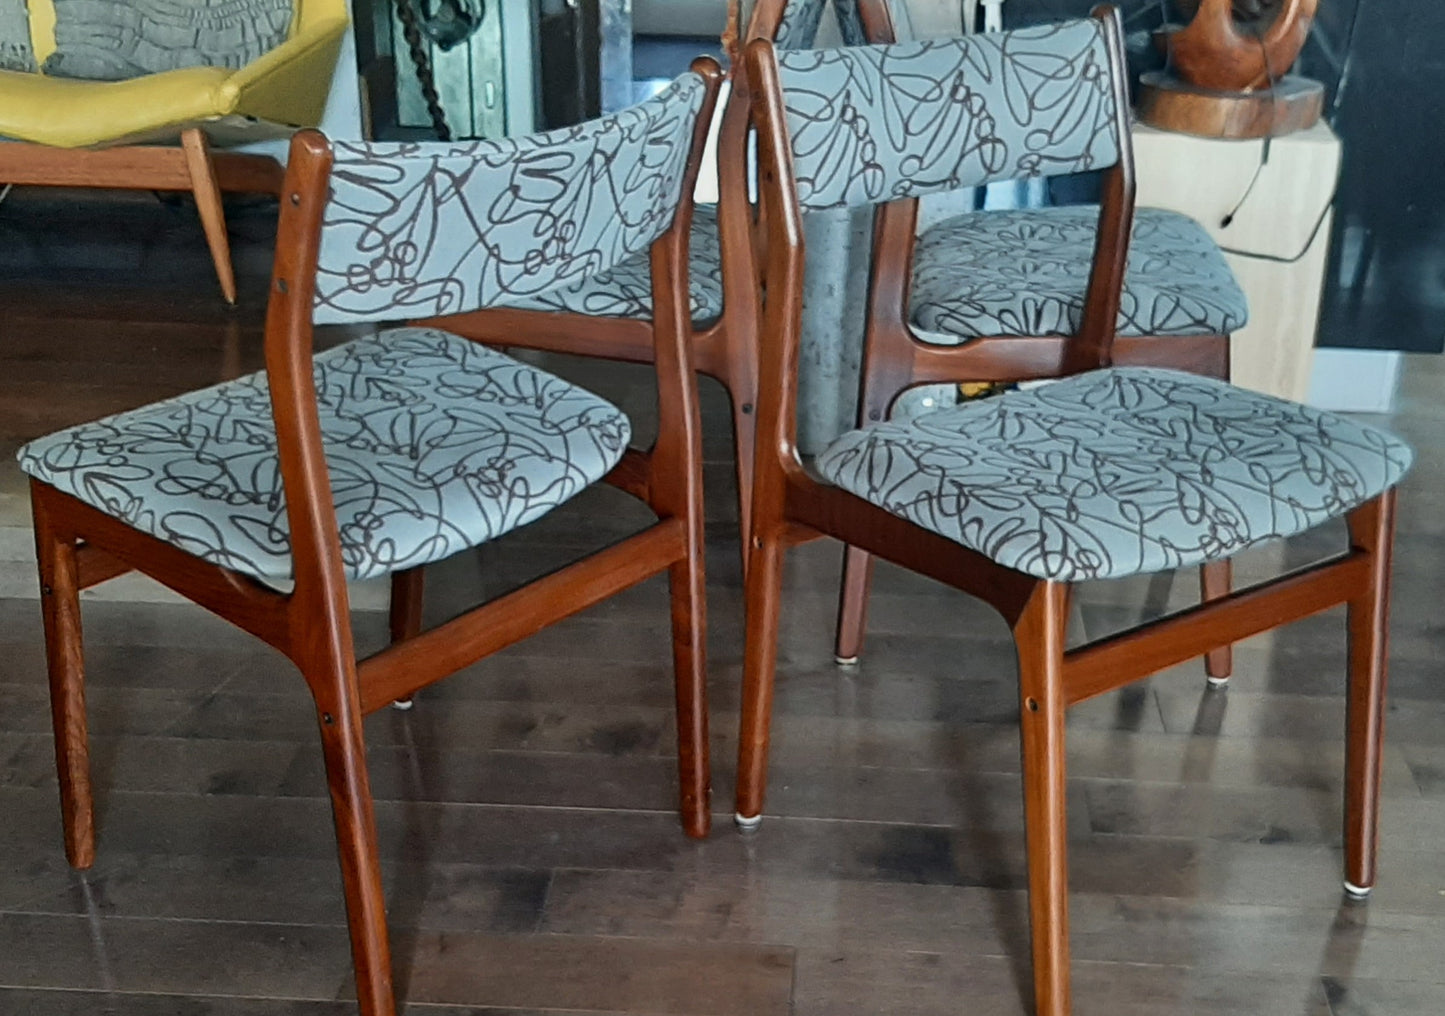 4 REFINISHED Danish MCM Teak Dining Chairs, ready for new upholstery